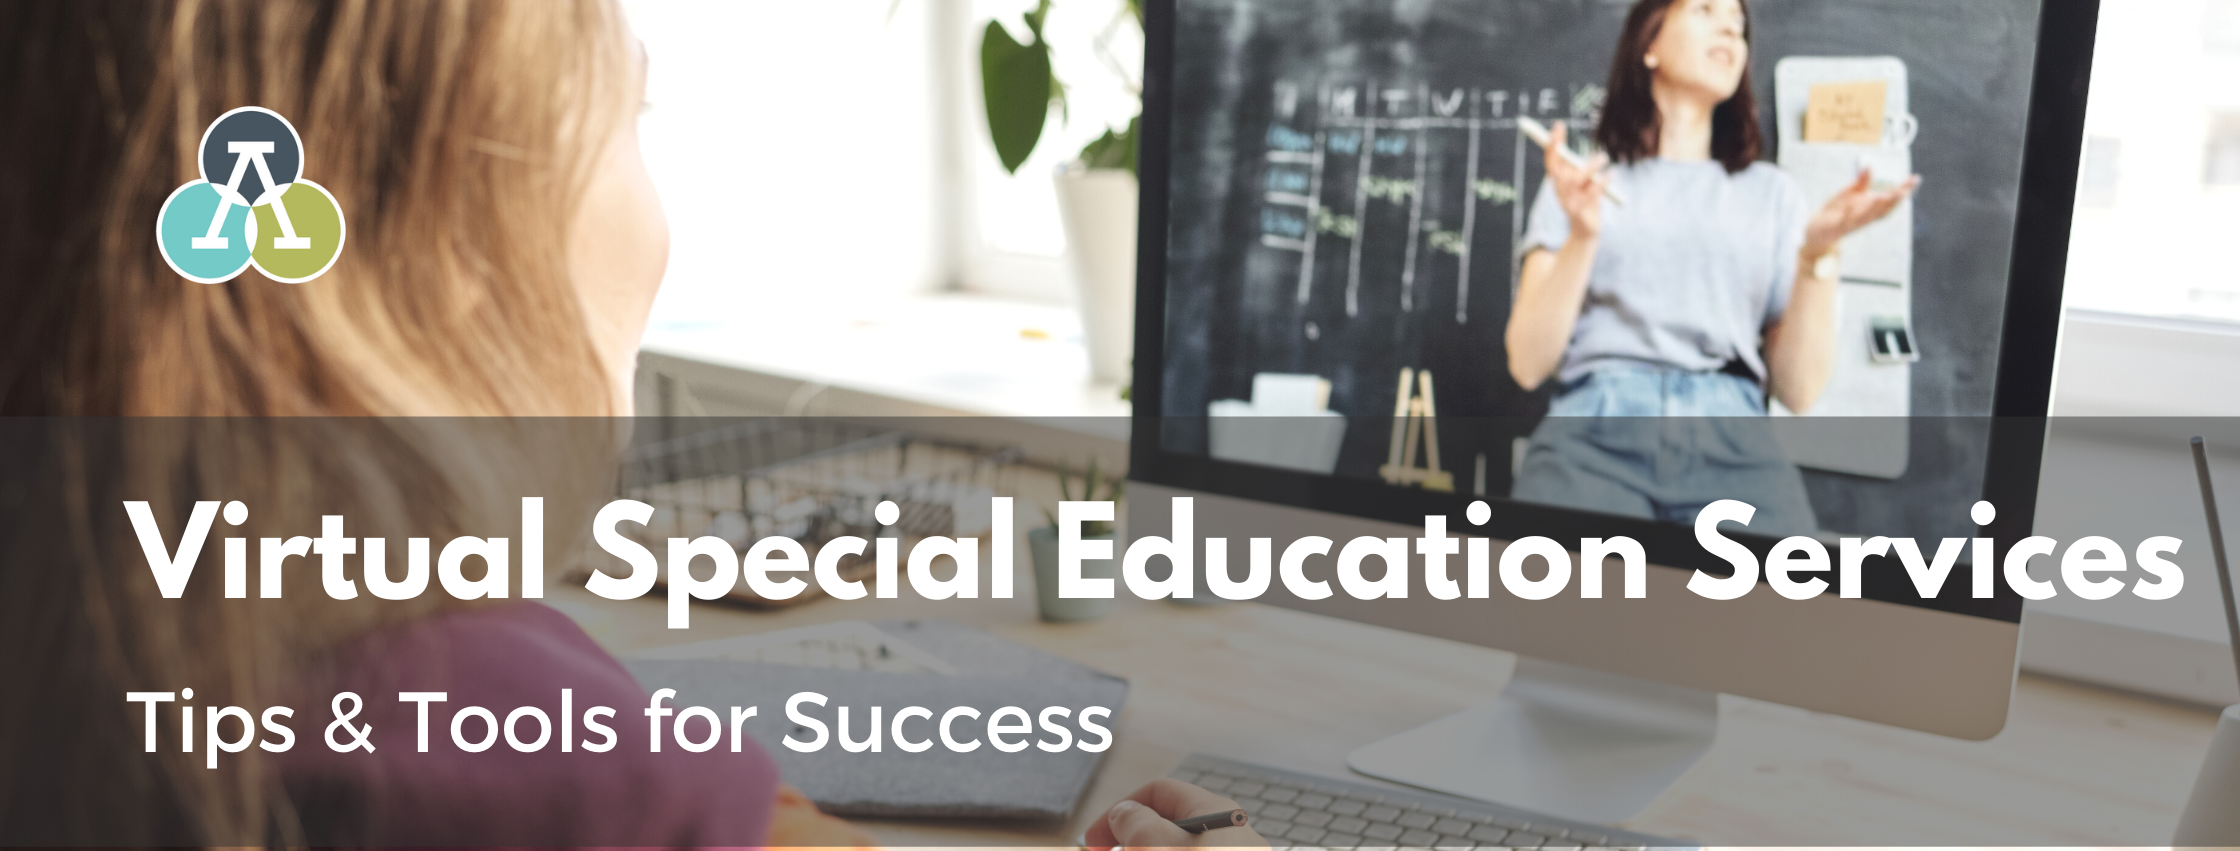 Virtual Special Education Services: Tips & Tools for Success